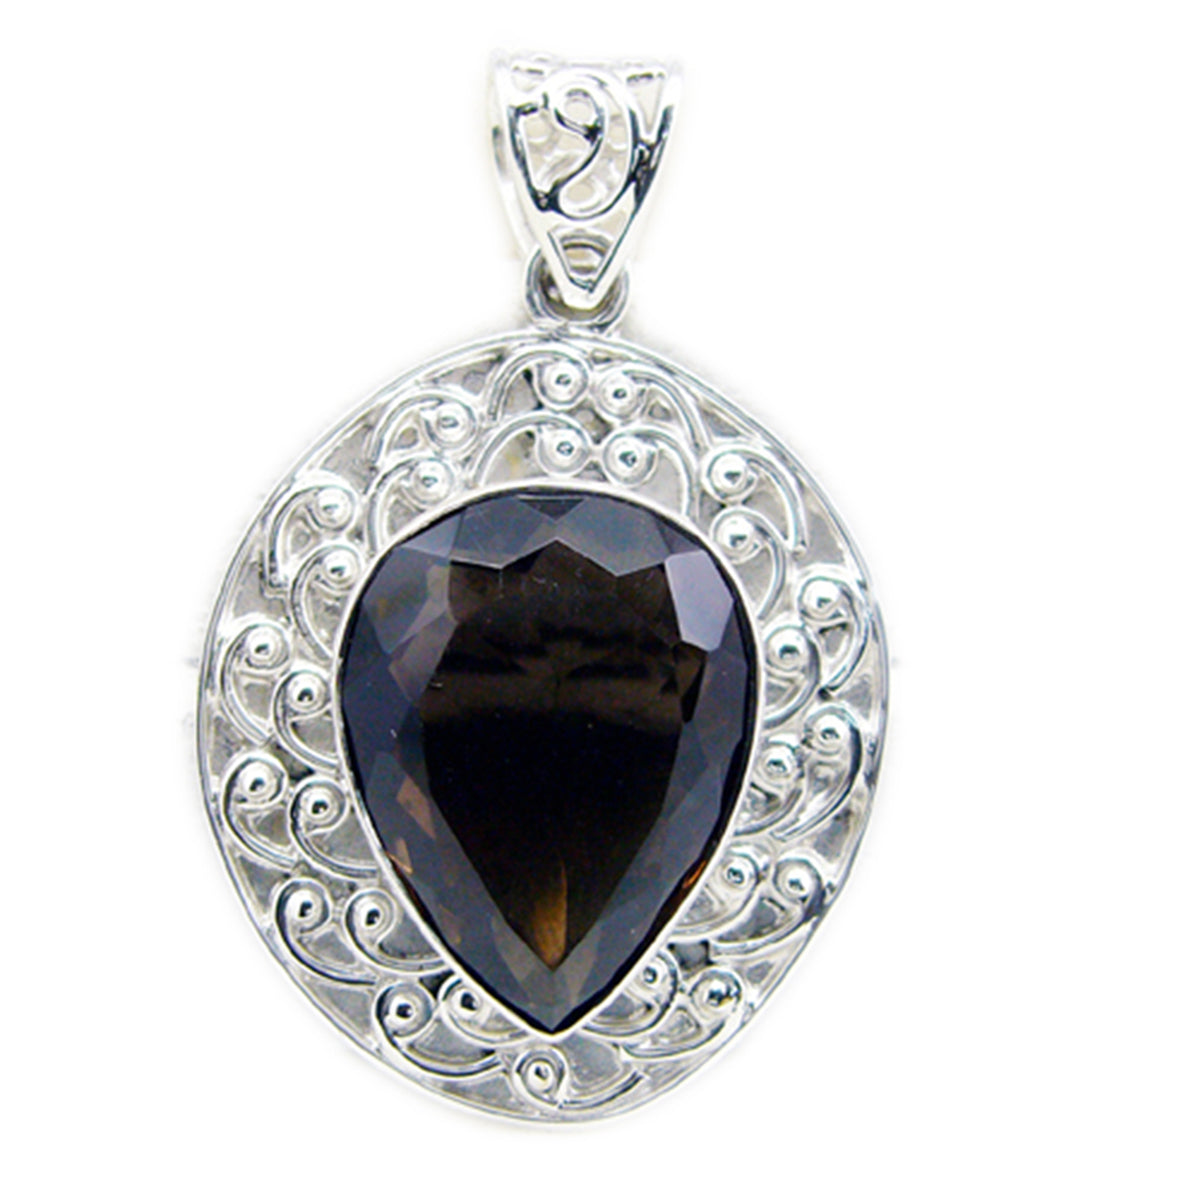 Riyo Real Gemstones Pear Faceted Brown smoky quartz Sterling Silver Pendant gift for mom birthday